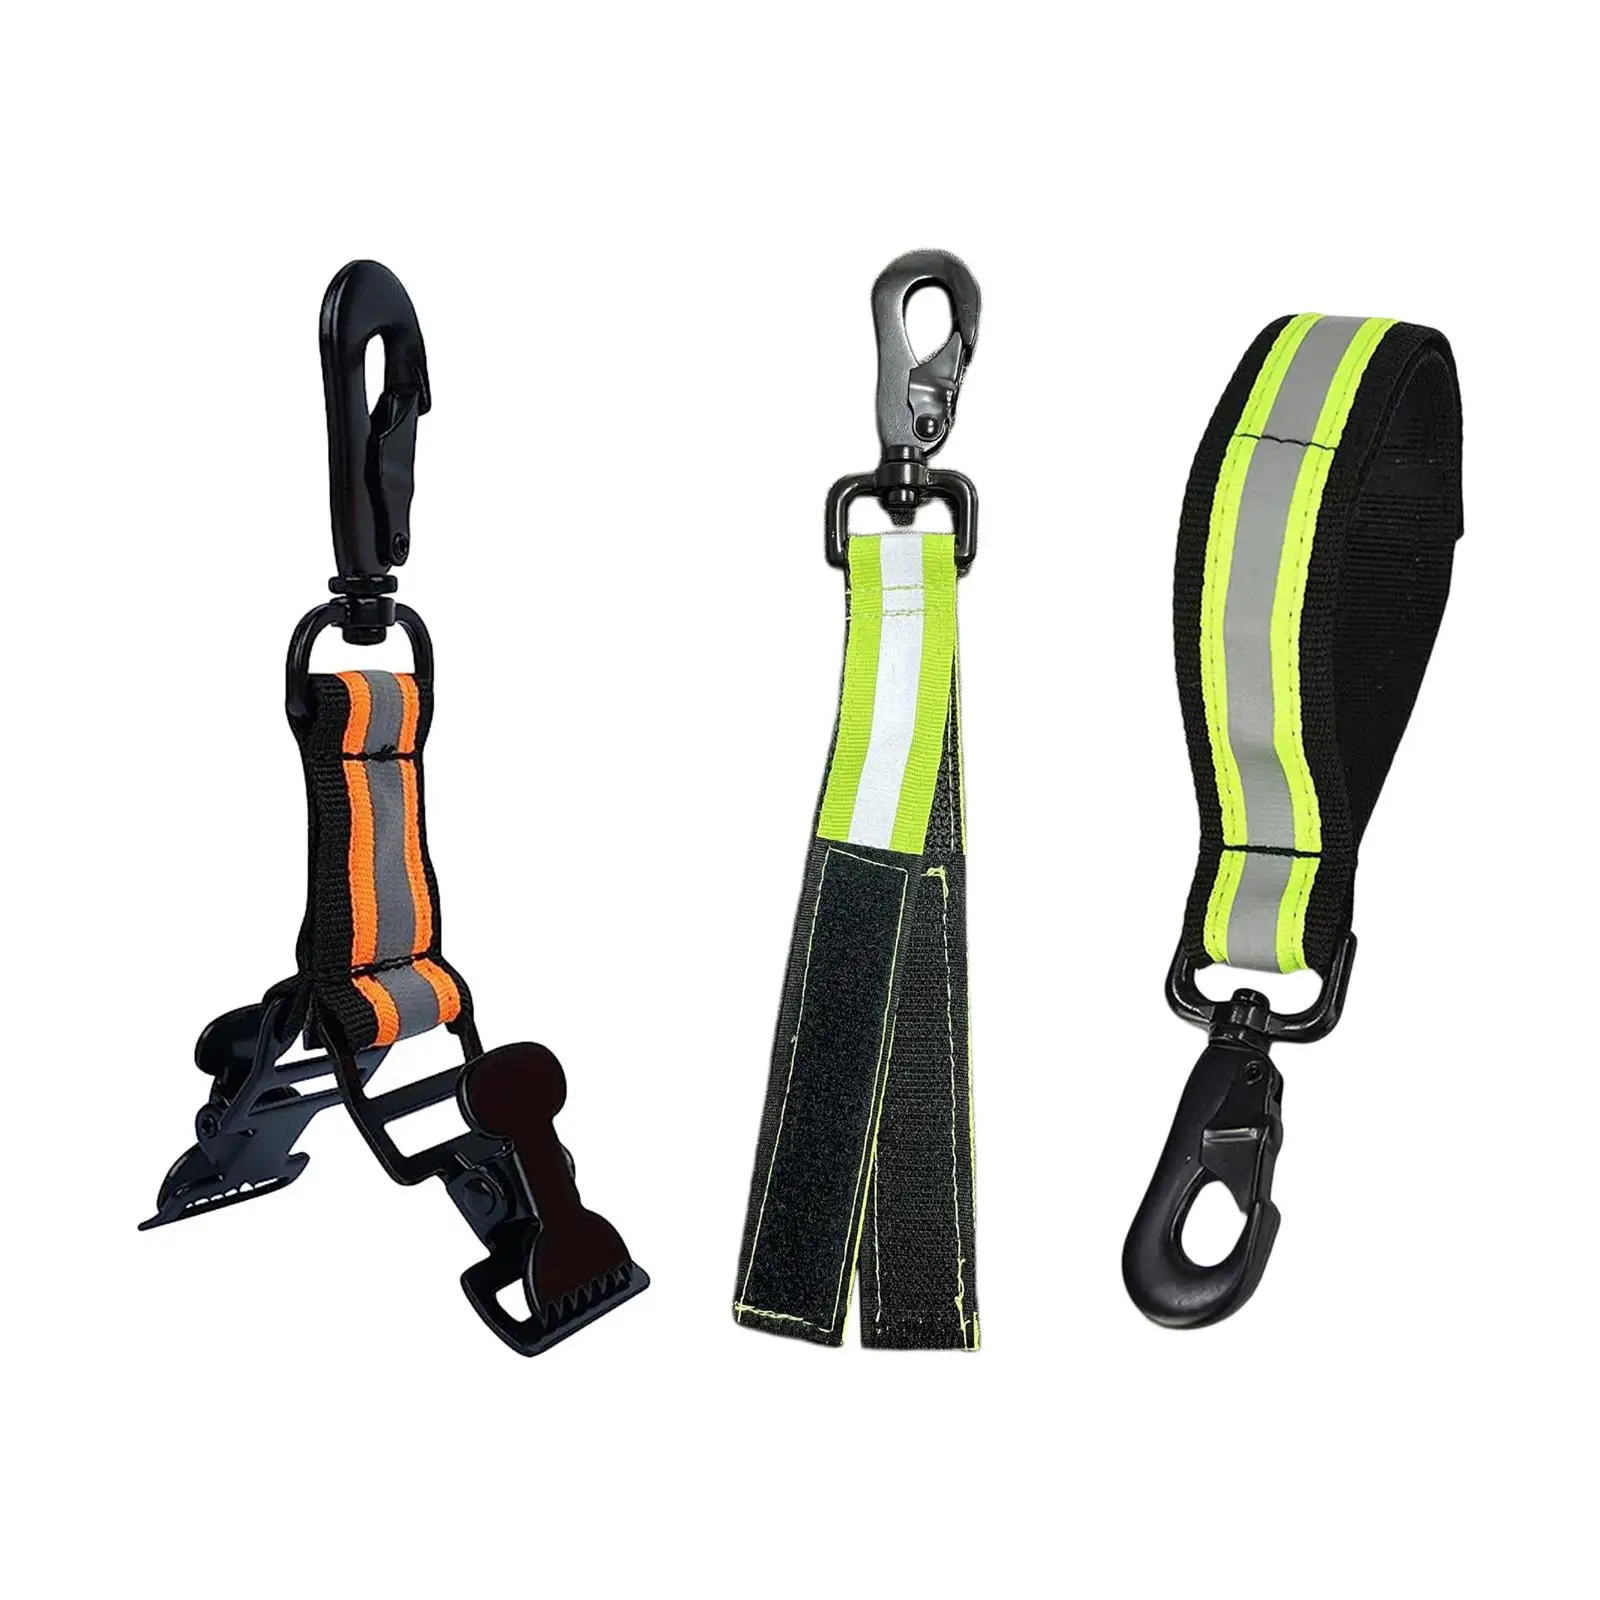 Firefighting Glove Strap Outdoor Tool 2 Clips for Welding Gloves for Workers Construction Workers Guards Firefighters